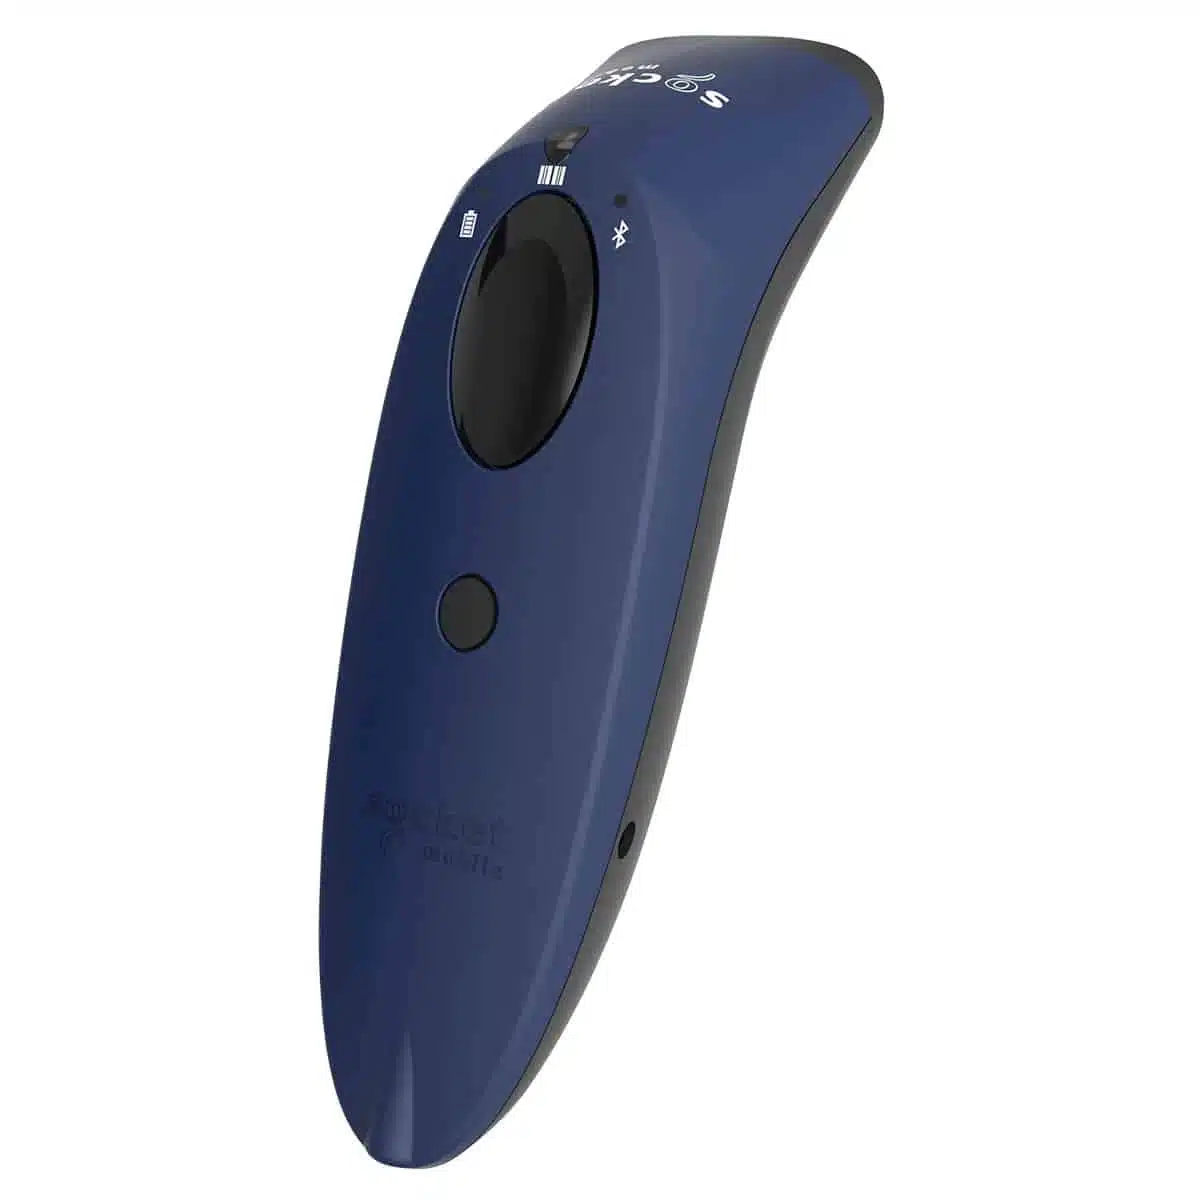 ocket-Scanner-S740_Scanners_Retail_Cordless_Blue side profile photo right side